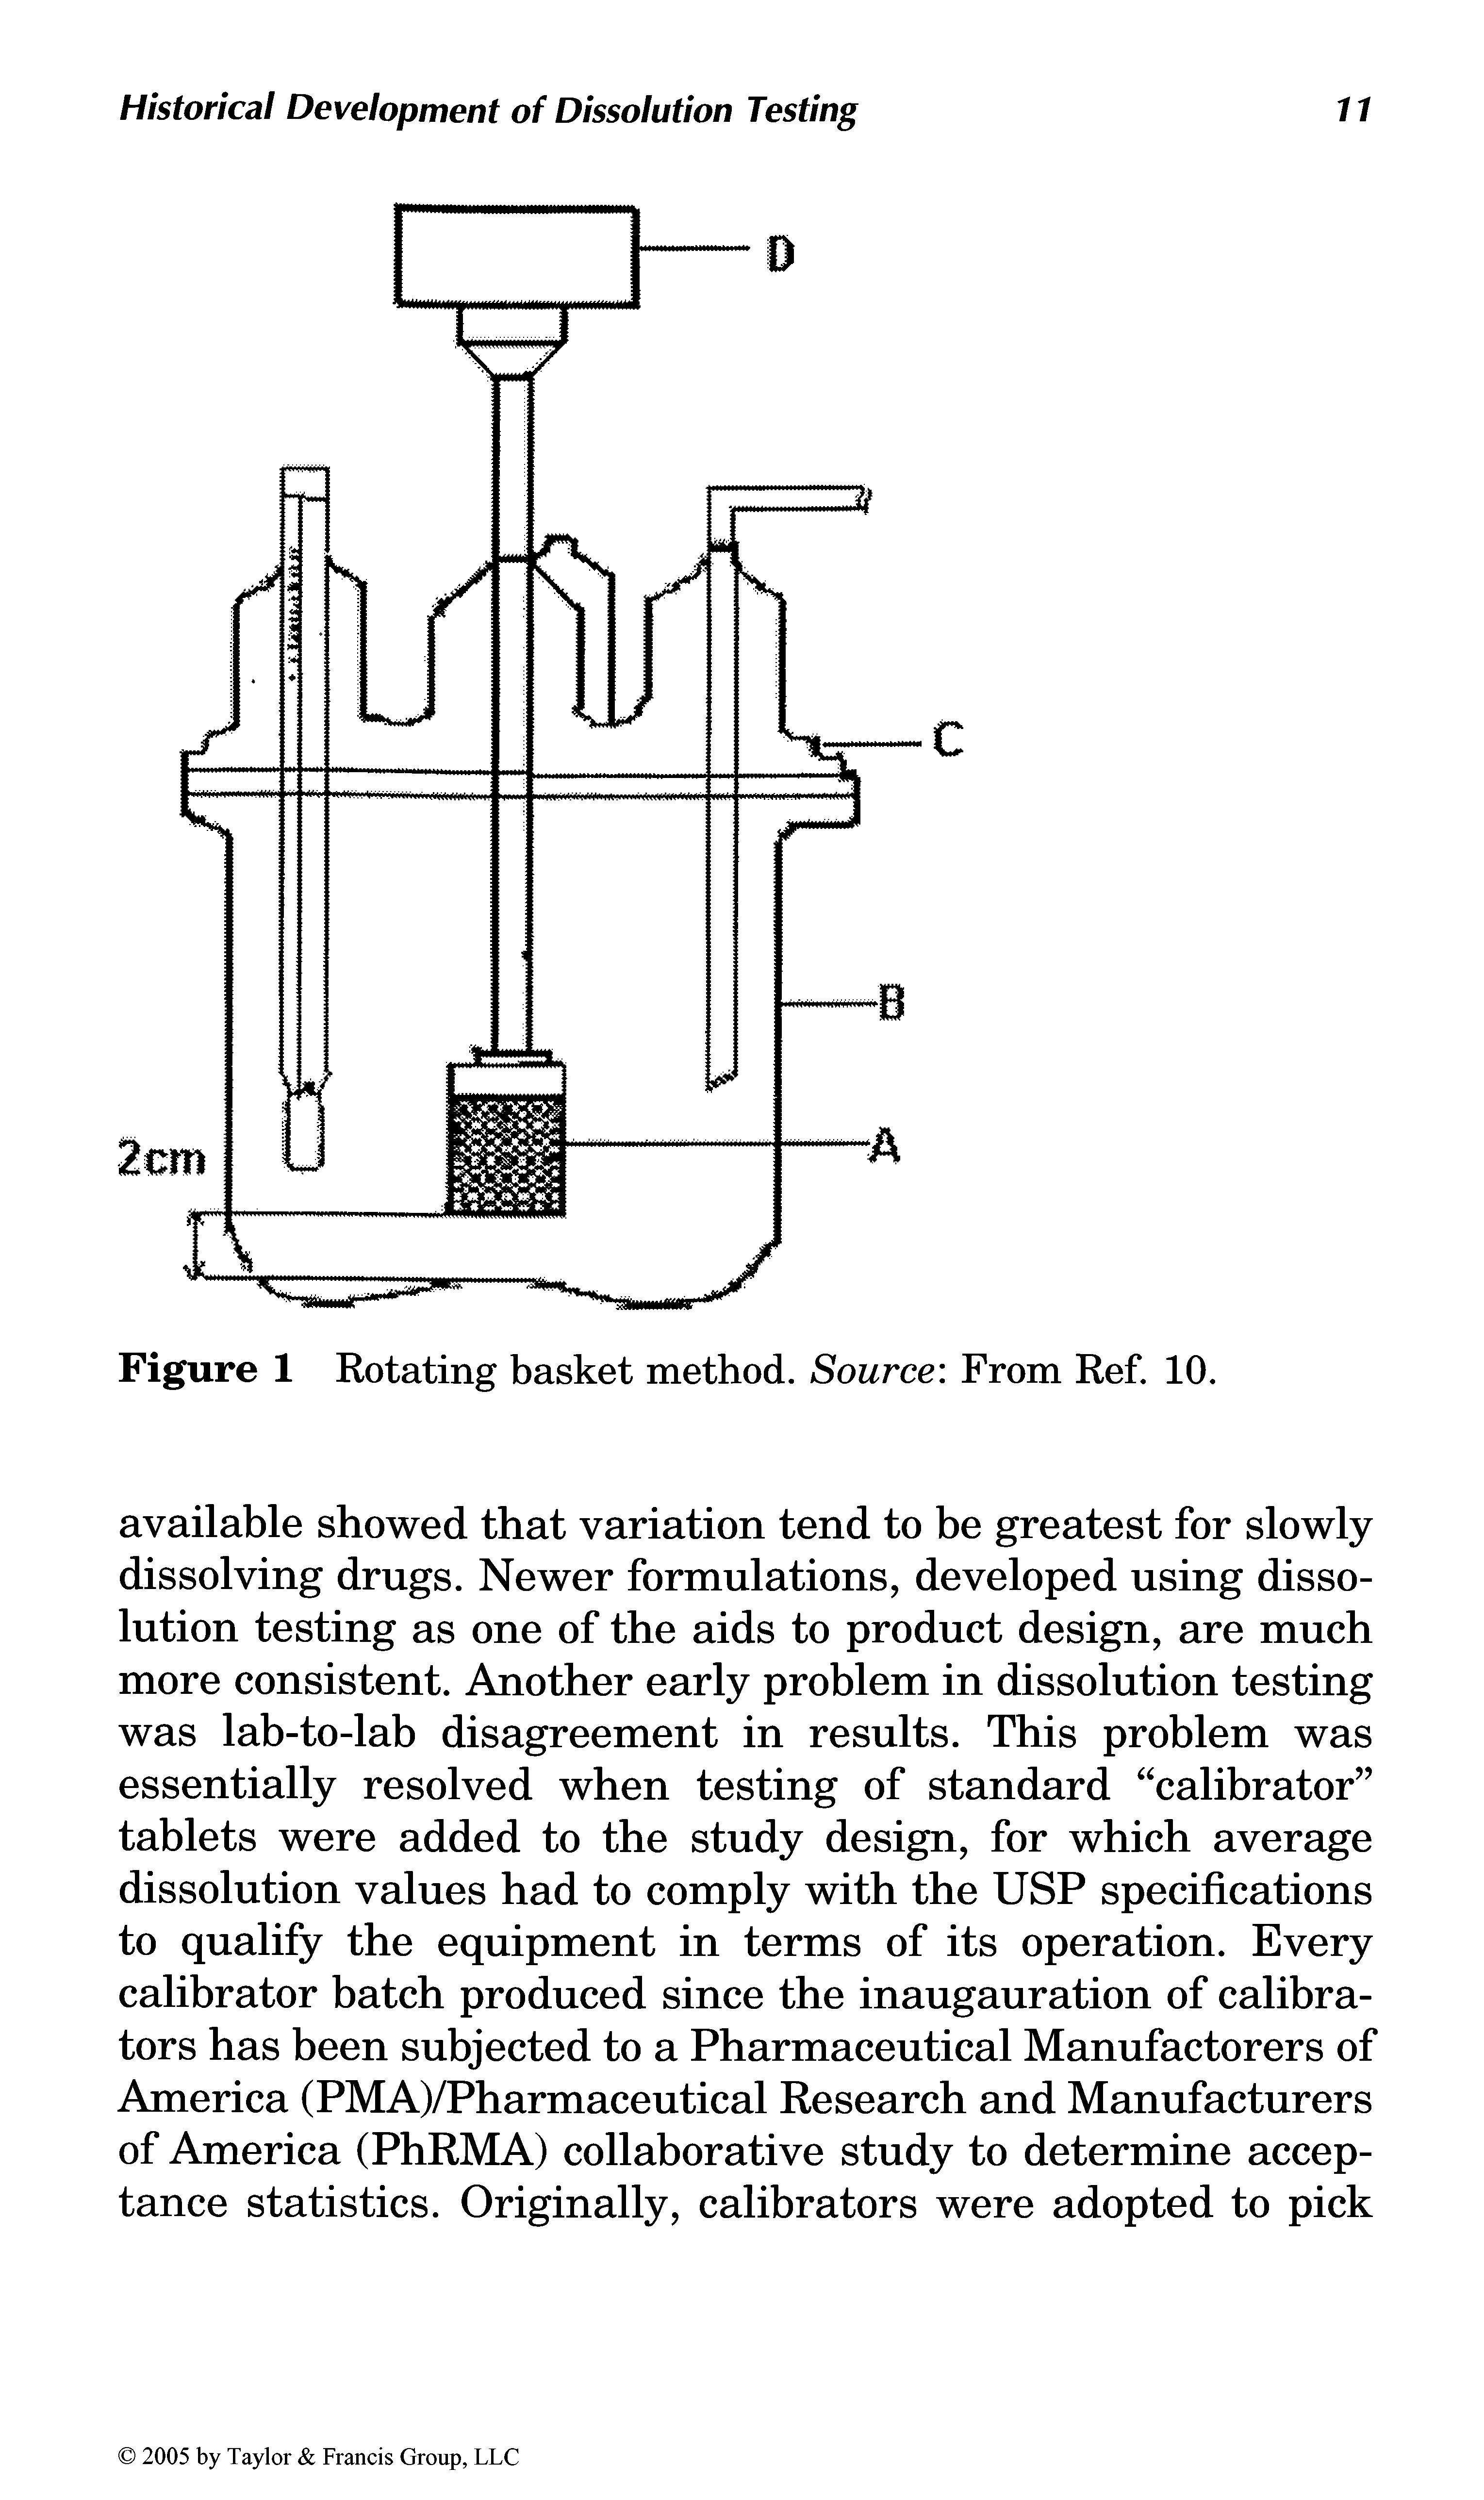 Figure 1 Rotating basket method. Source From Ref. 10.